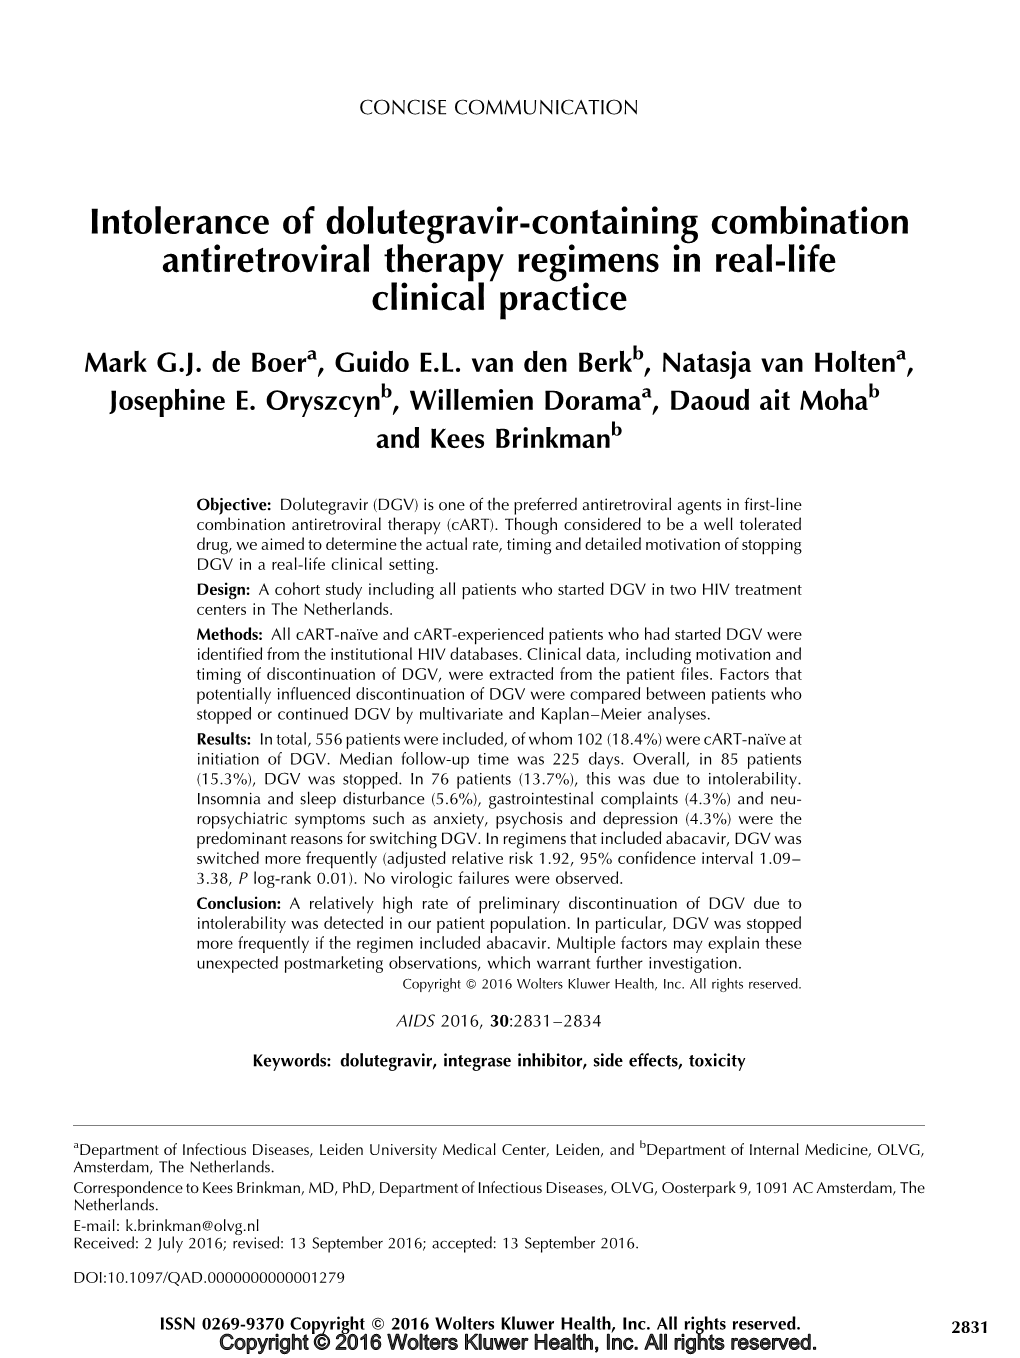 Intolerance of Dolutegravir-Containing Combination Antiretroviral Therapy Regimens in Real-Life Clinical Practice